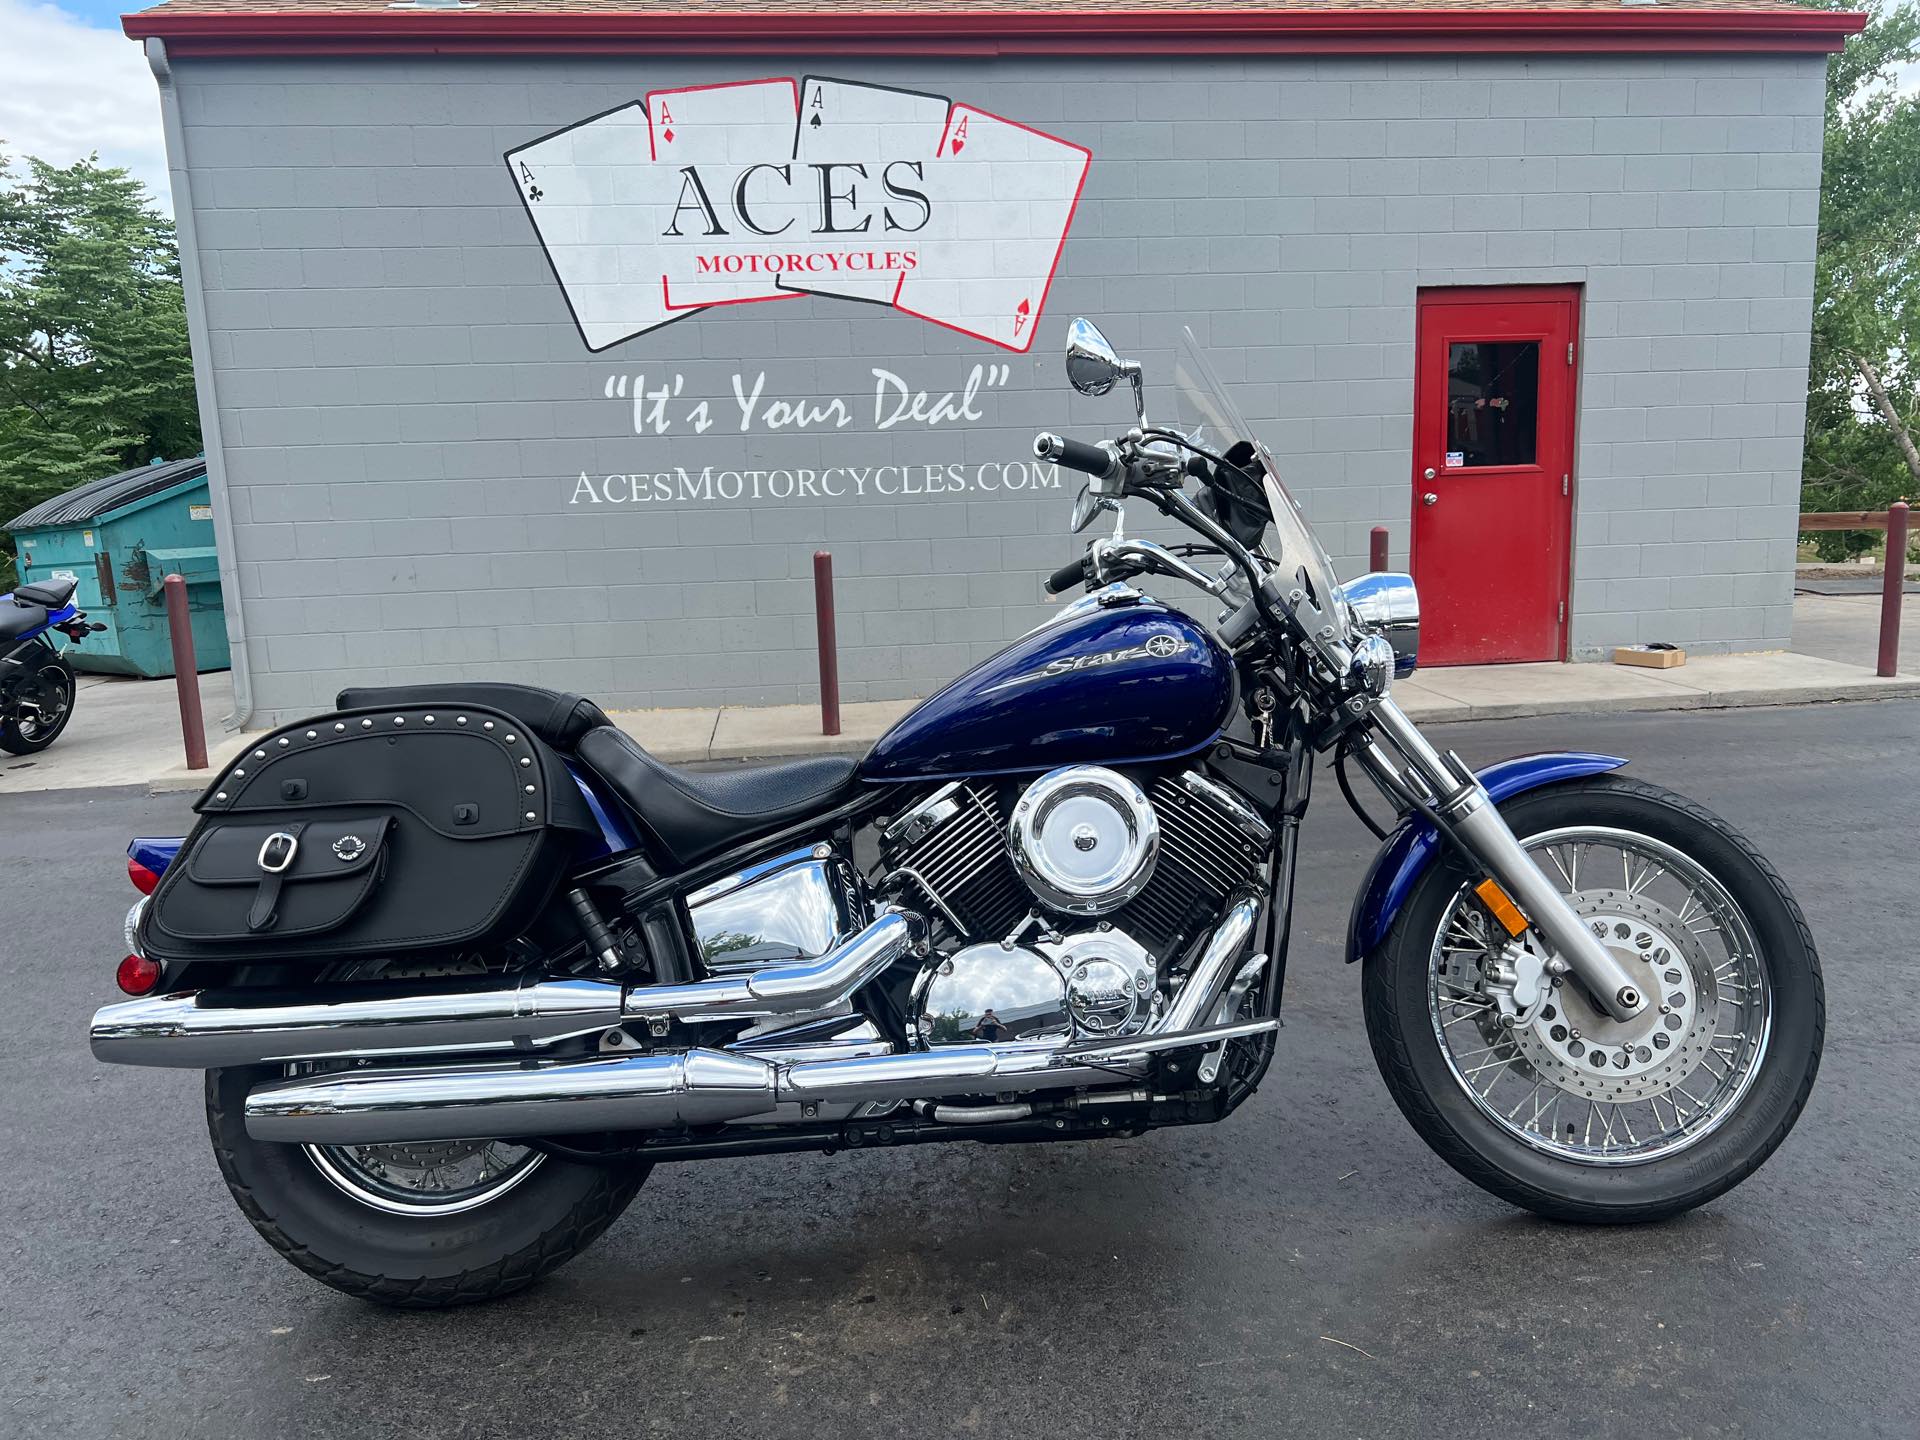 2008 Yamaha V Star 1100 Custom at Aces Motorcycles - Fort Collins